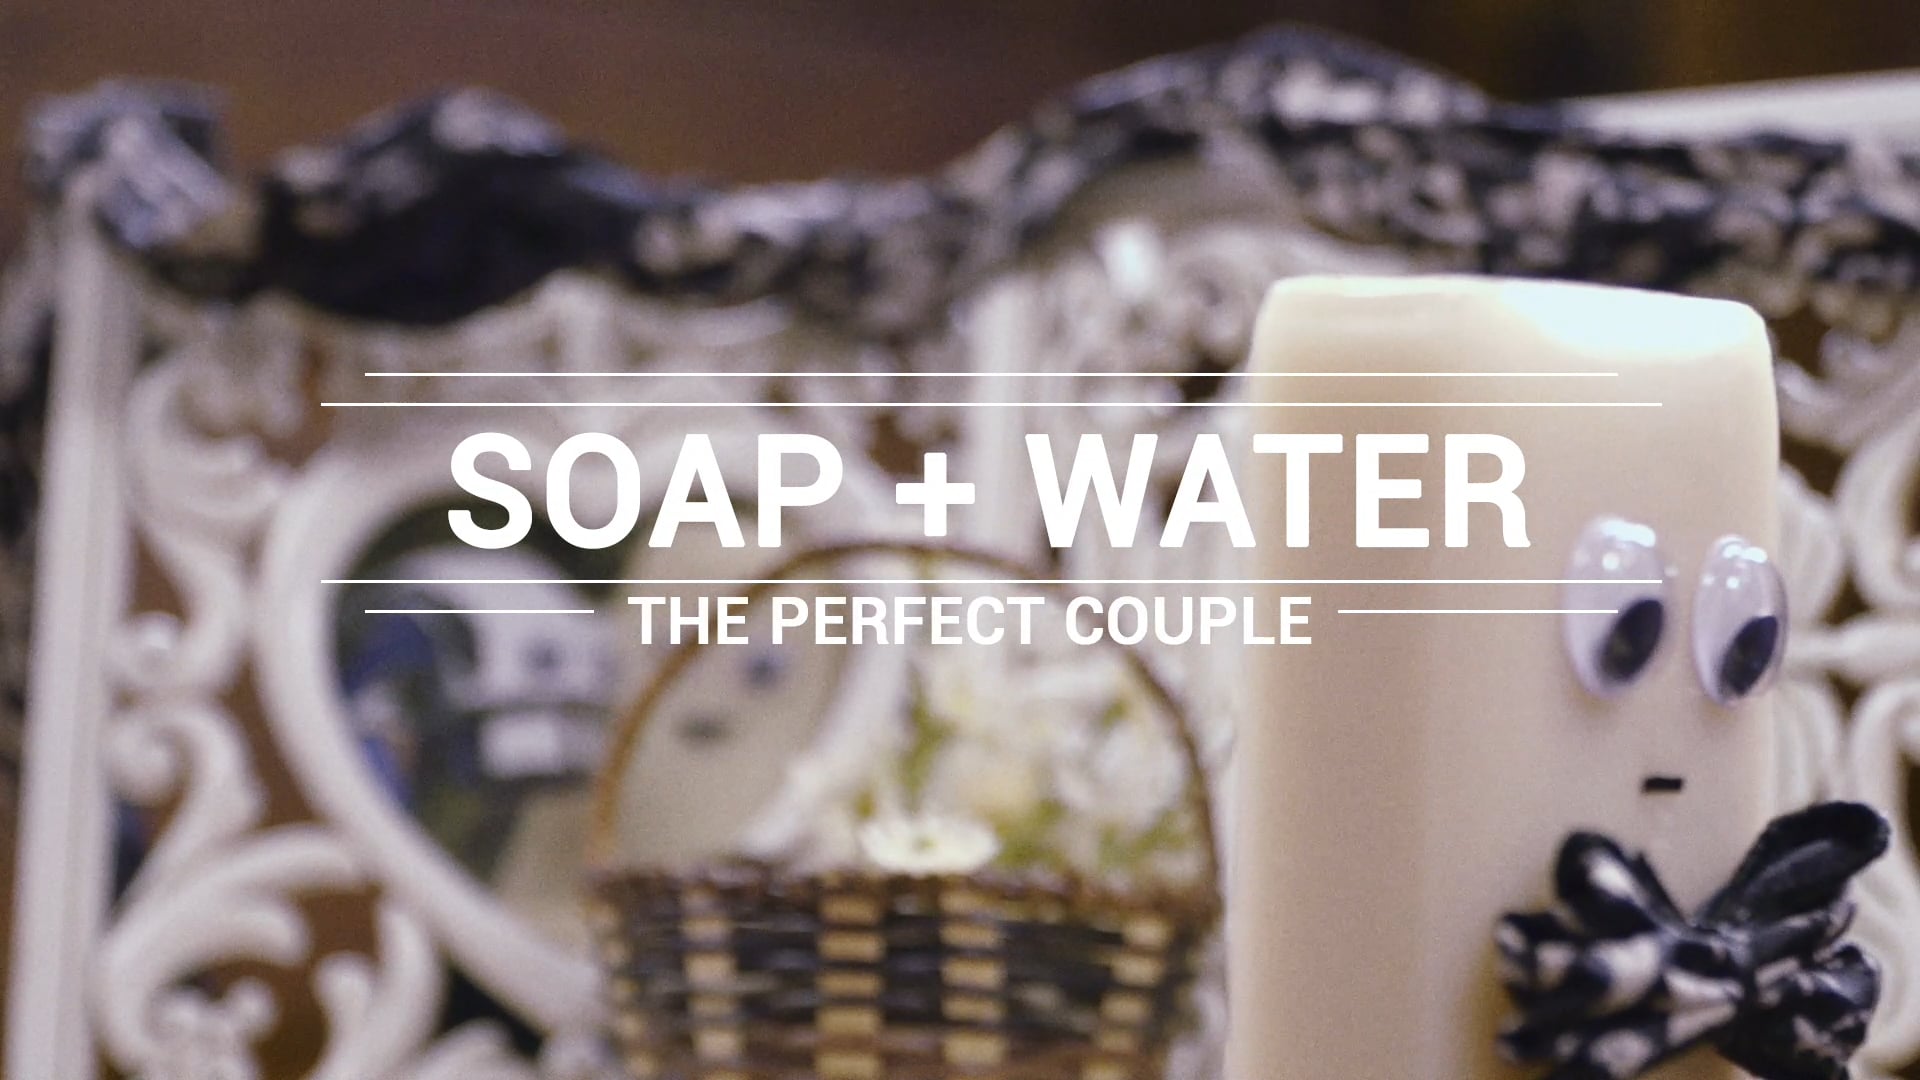 Soap & Water: The Perfect Couple (Unicef PSA)